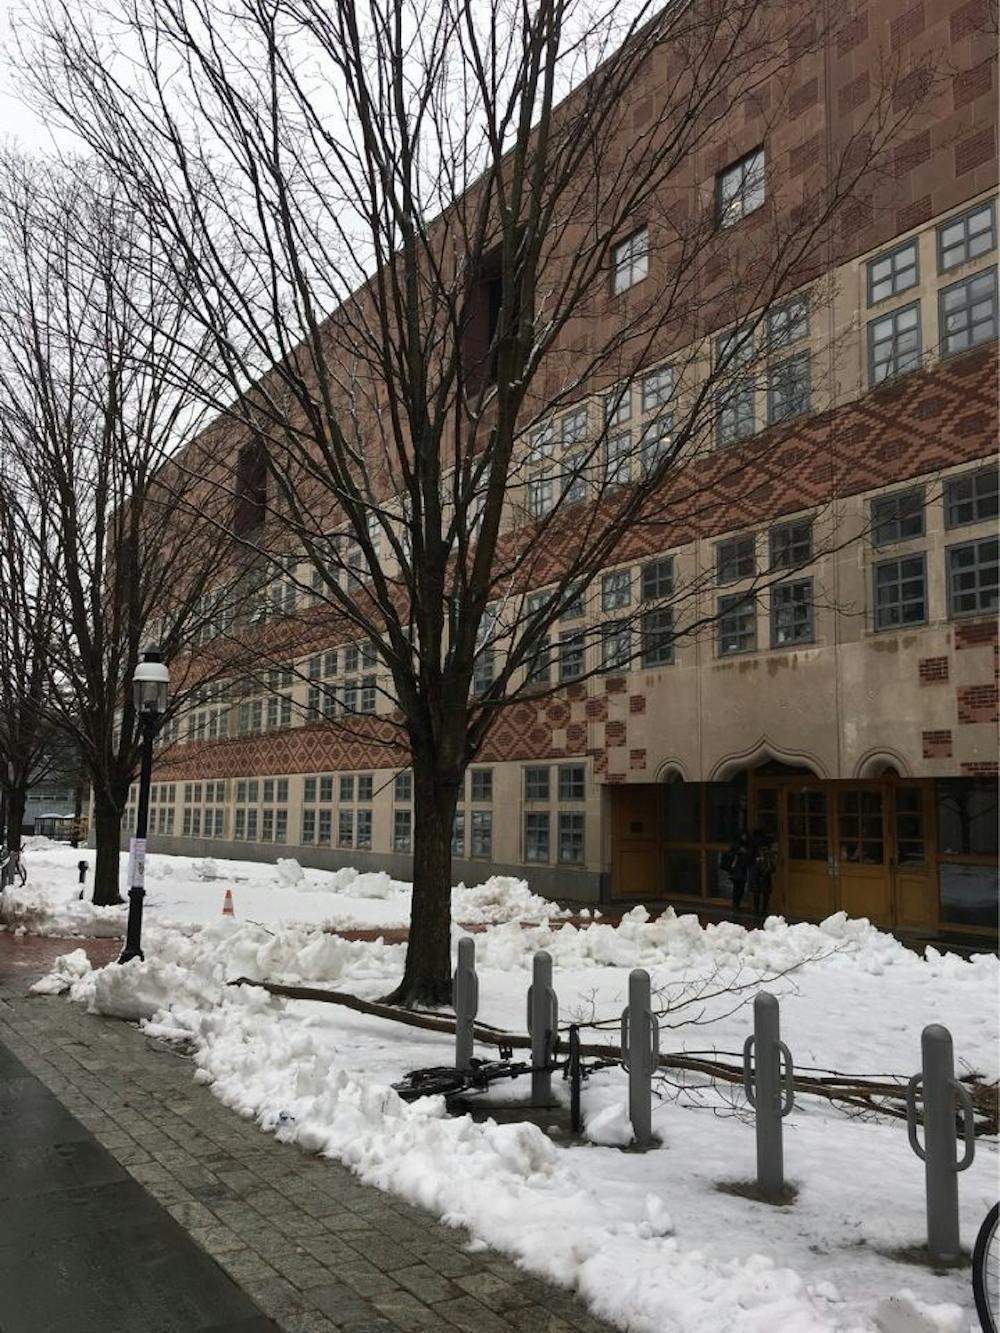 <h5>Lewis Thomas Laboratory, where COVID-19 tests are processed on campus.</h5>
<h6>Daily Princetonian Staff / The Daily Princetonian</h6>